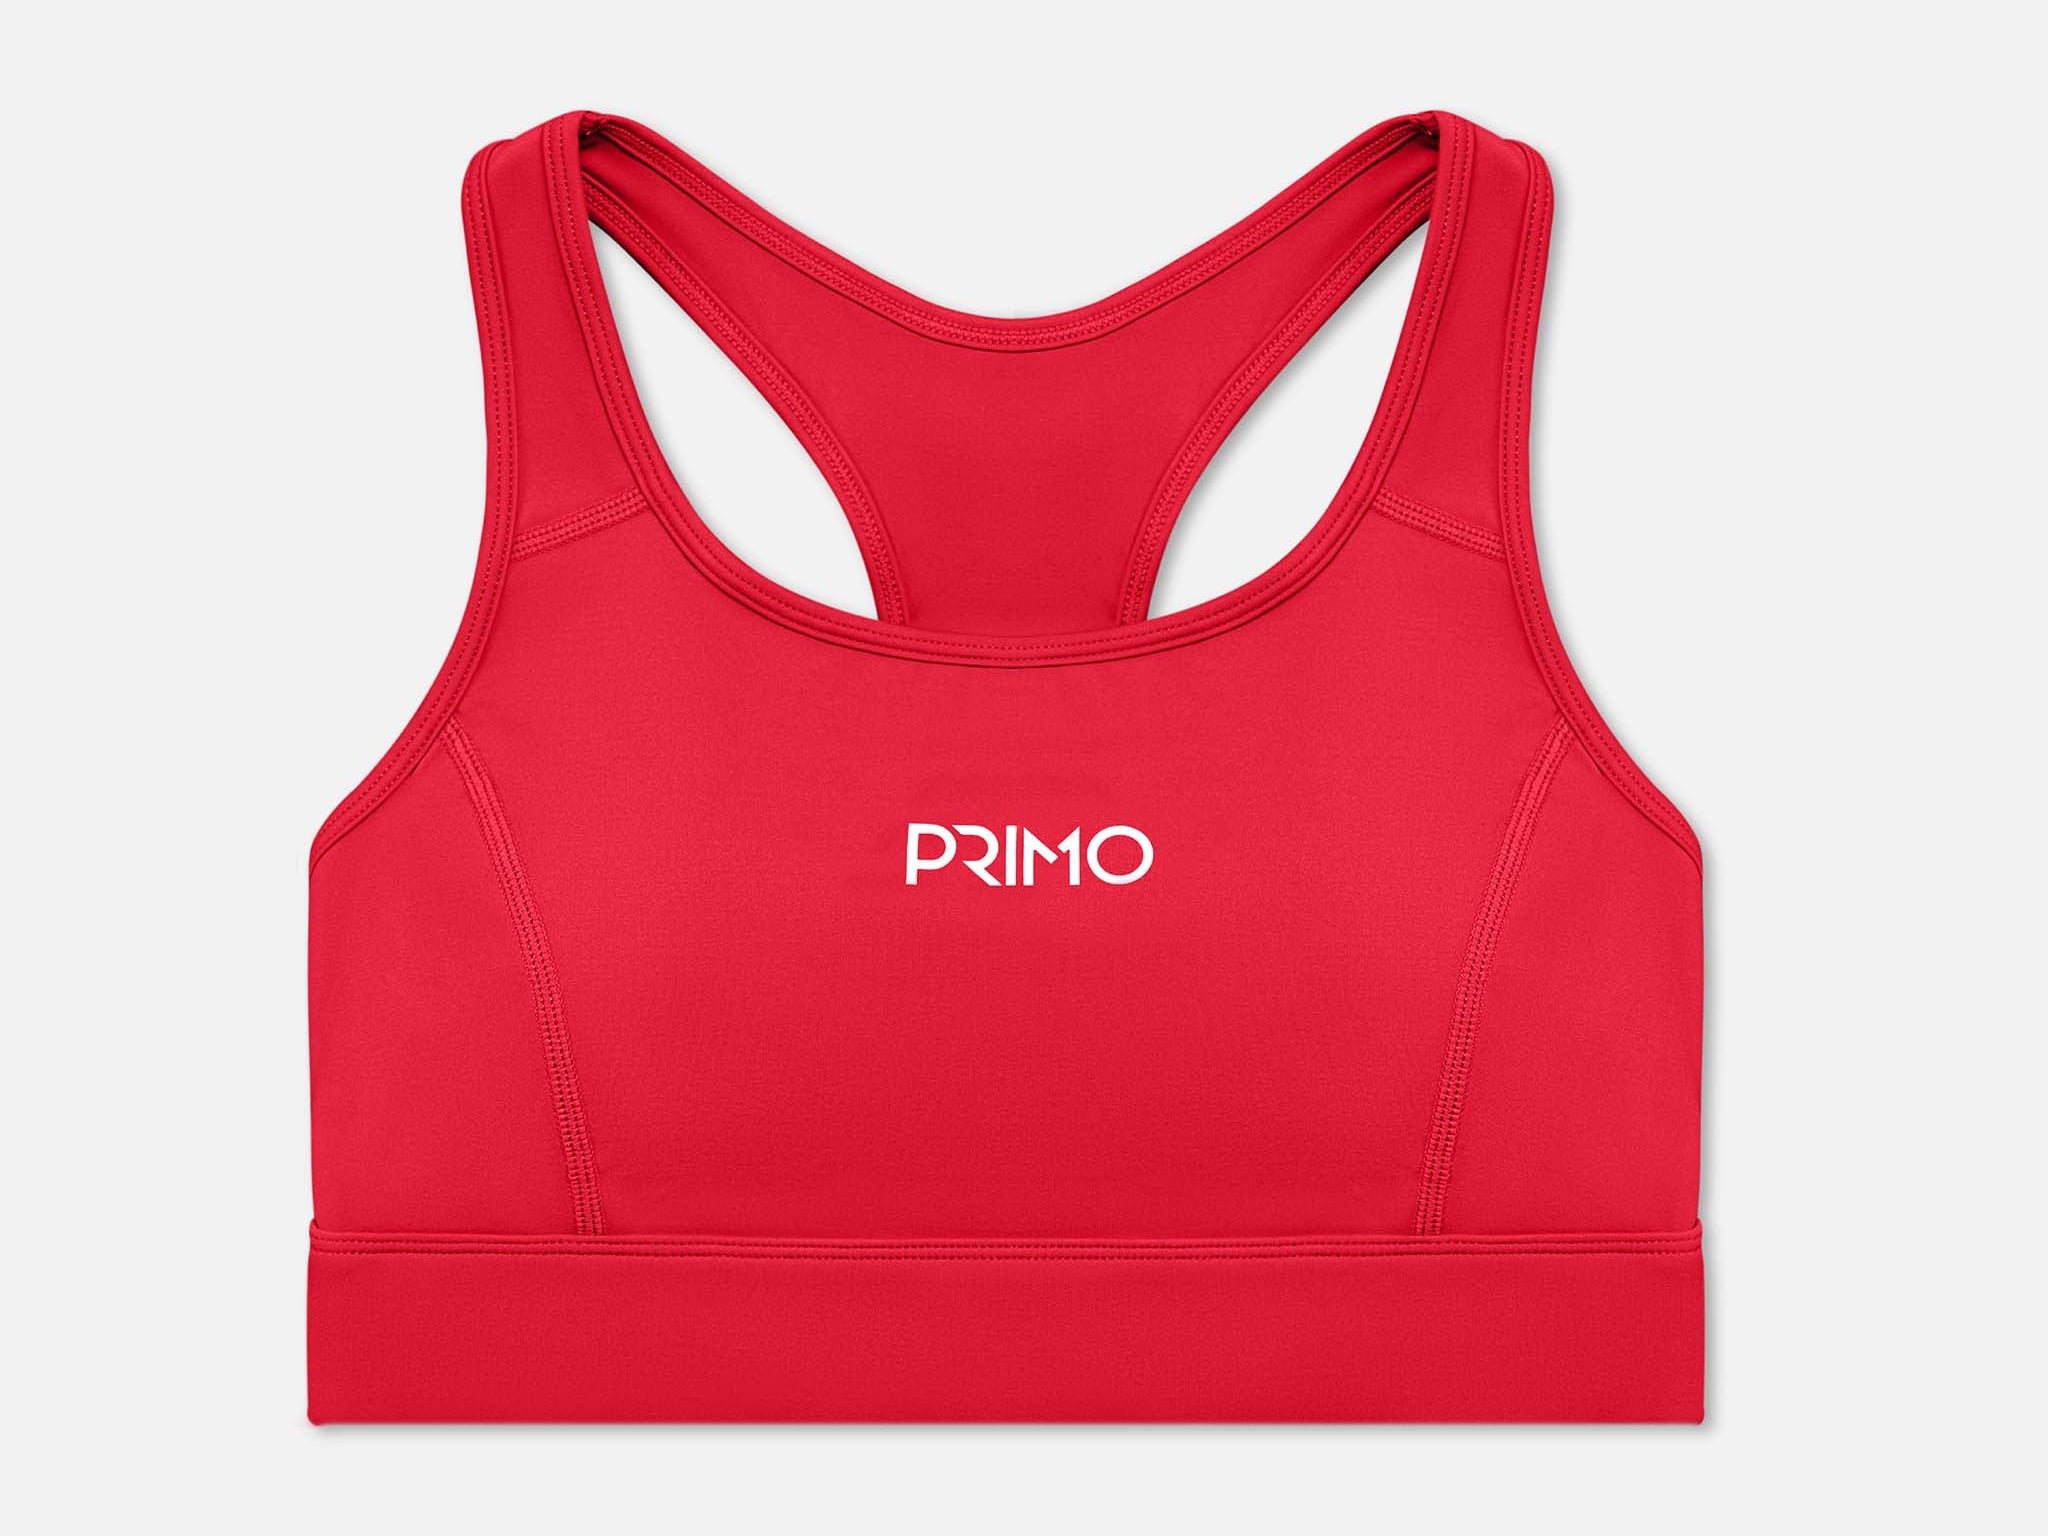 Primo Fight Wear Official Air Sports Bra - Red